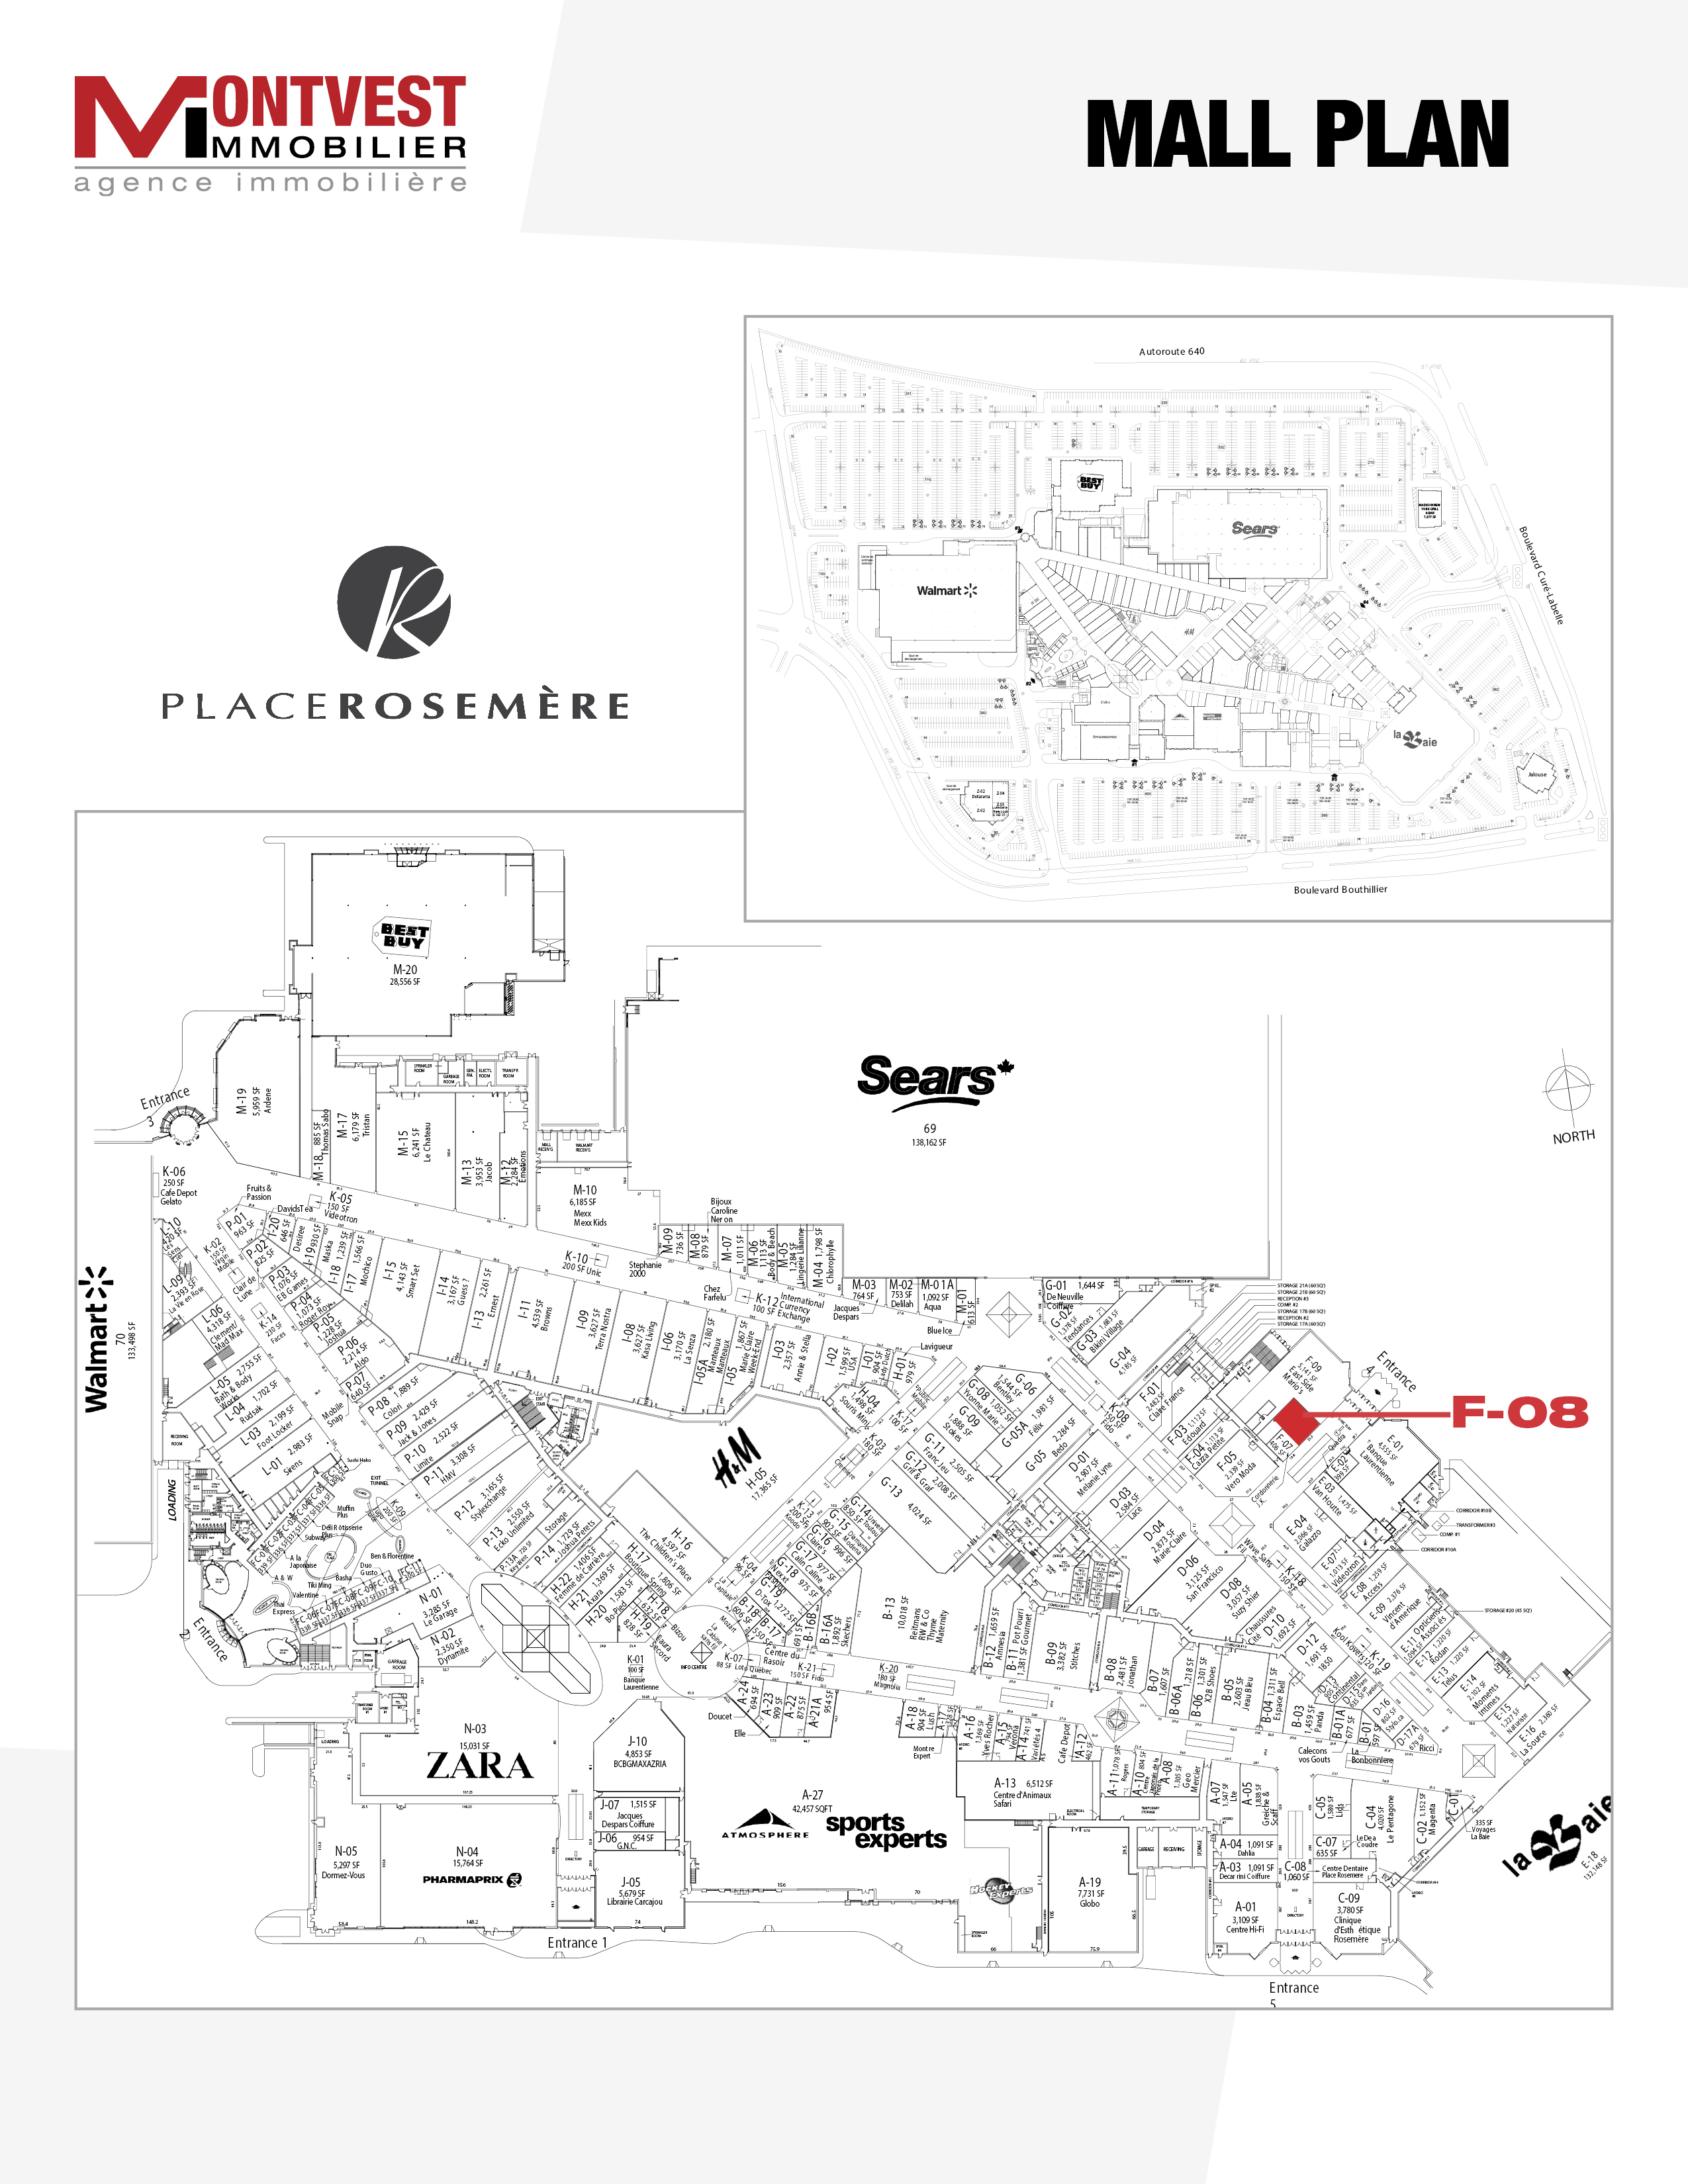 Unit Location in the Mall